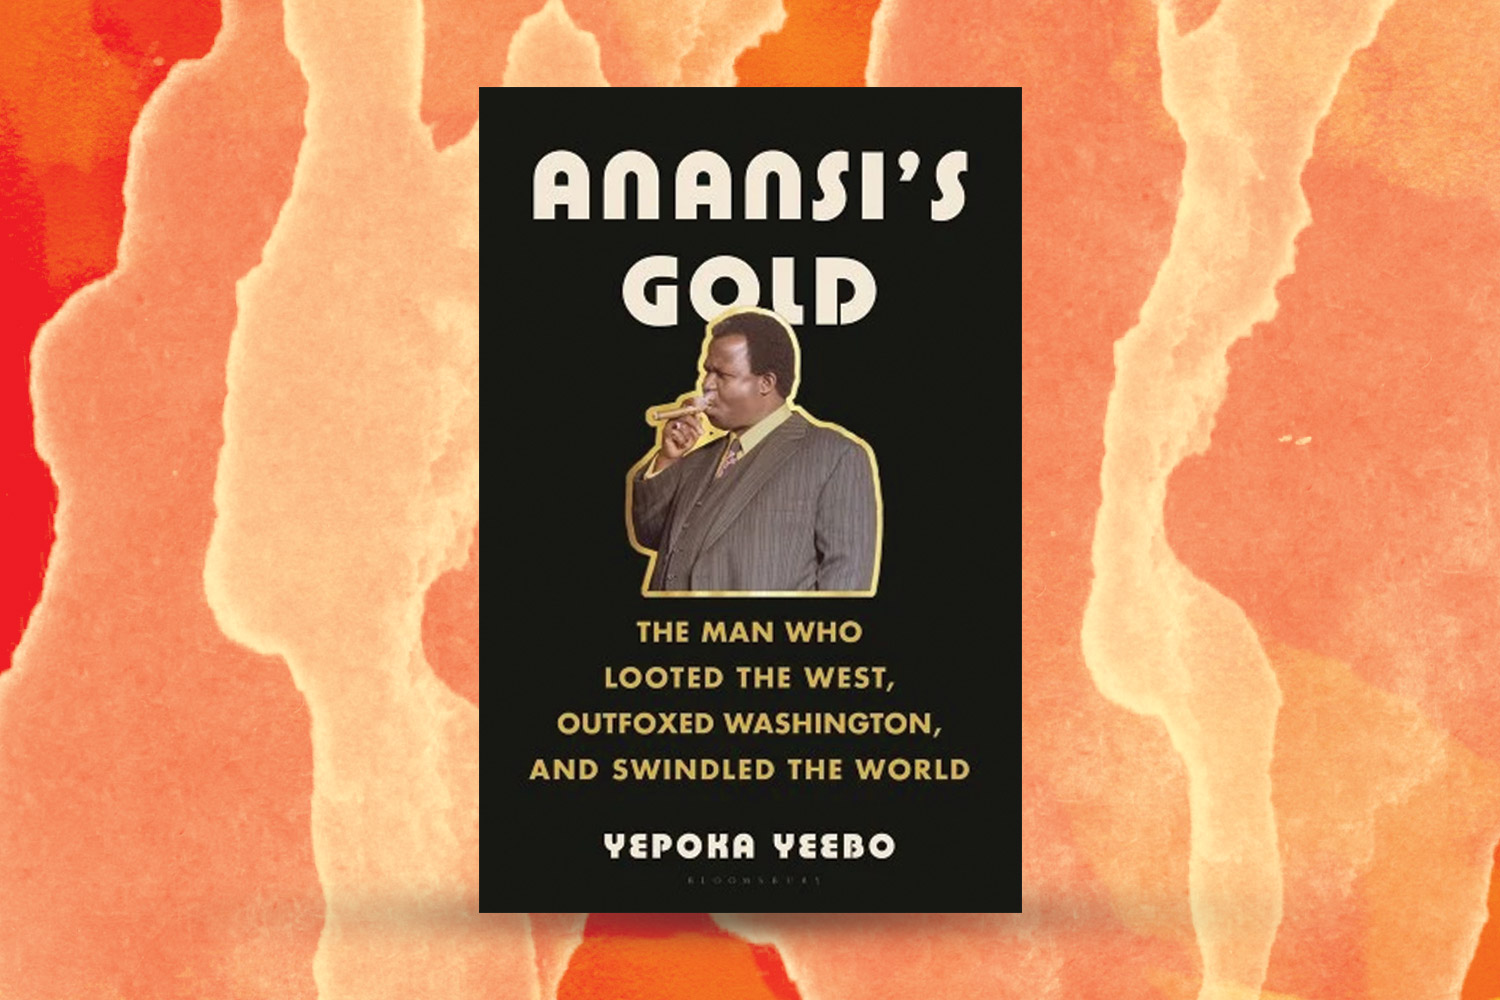 "Anansi's Gold" cover